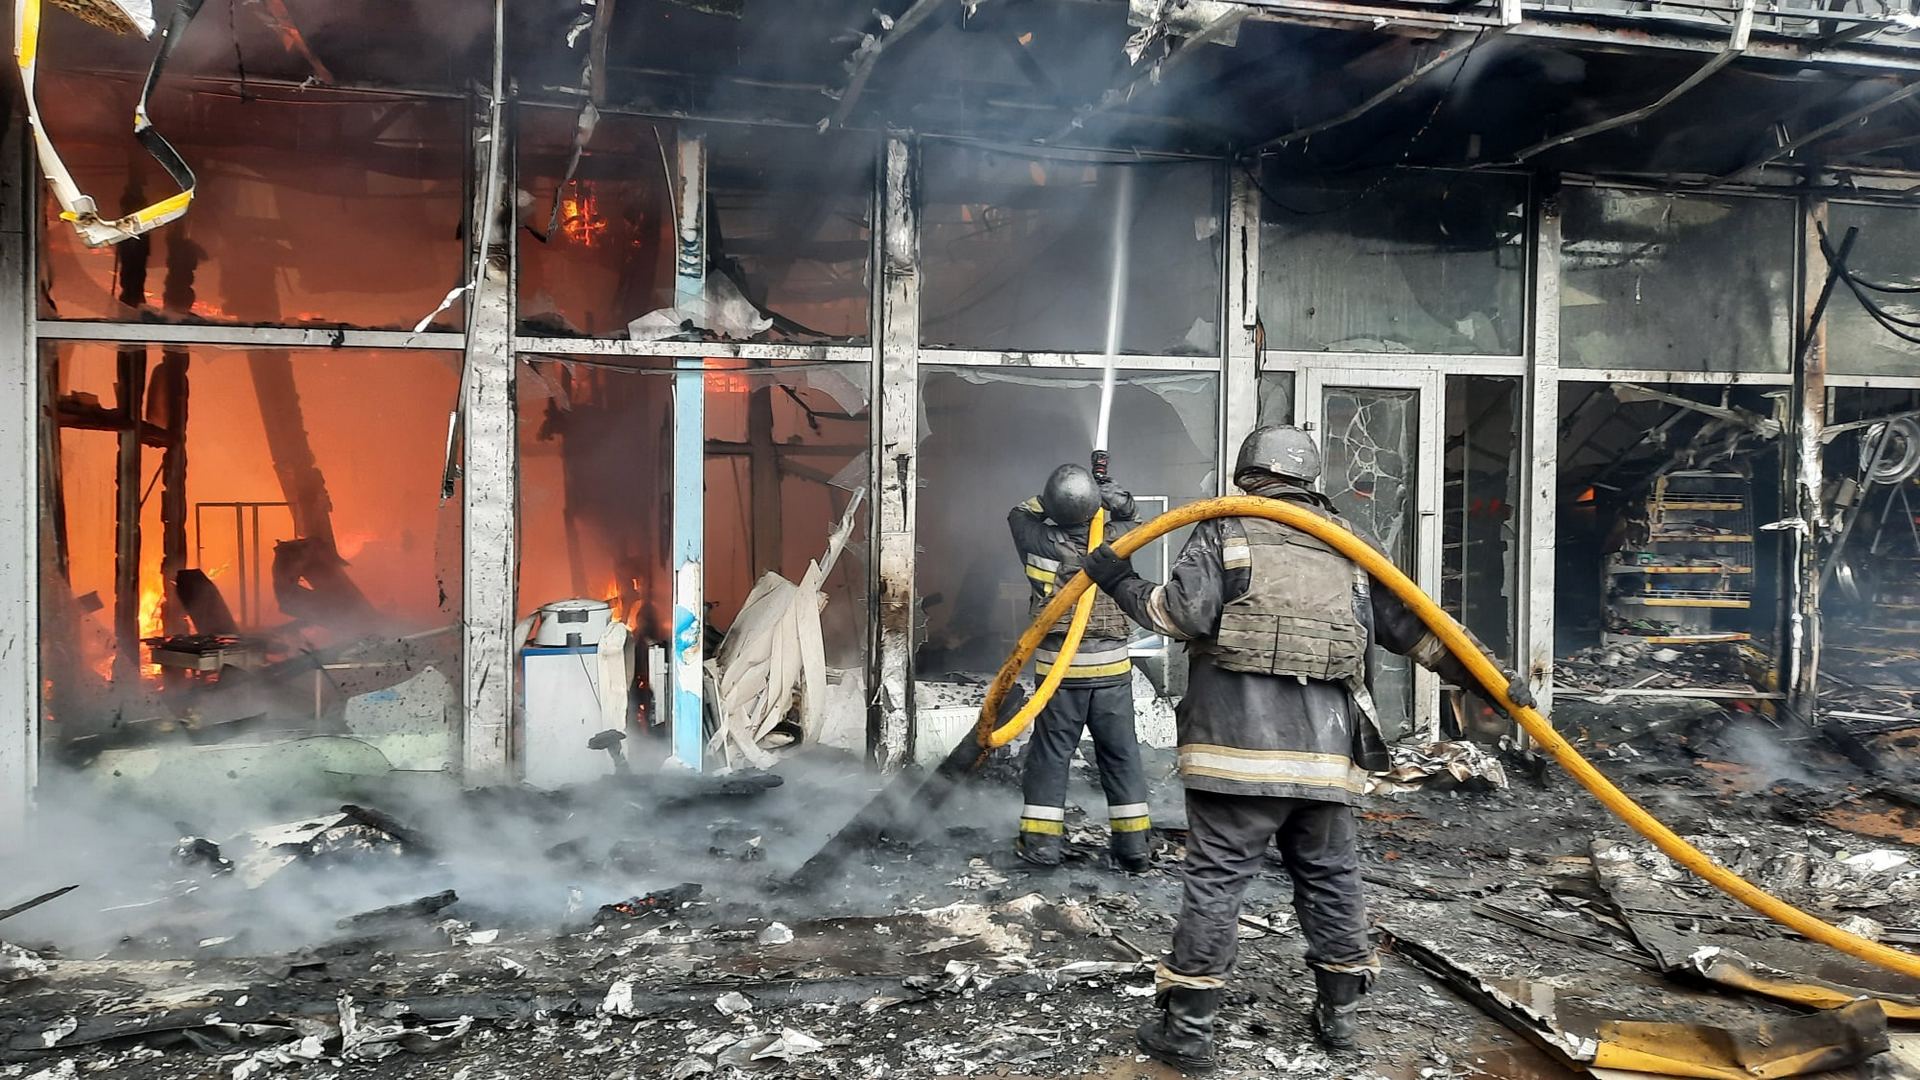 Rescuers extinguish large fire caused by Russian missile in Kharkiv